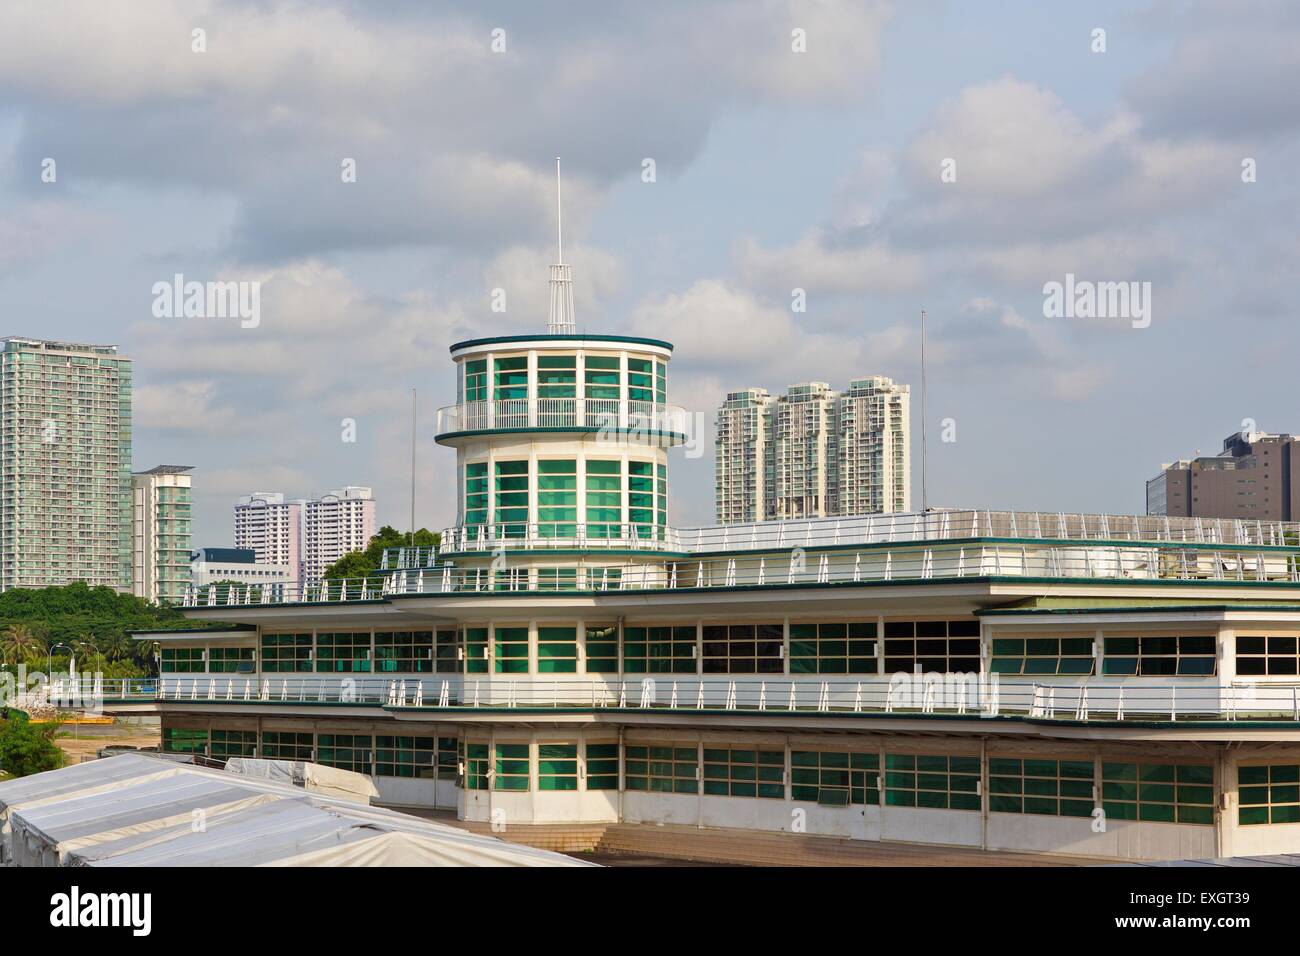 The Historic Art Deco Terminal Building On The Site Of The Old Kallang Airport, Singapore. Stock Photo